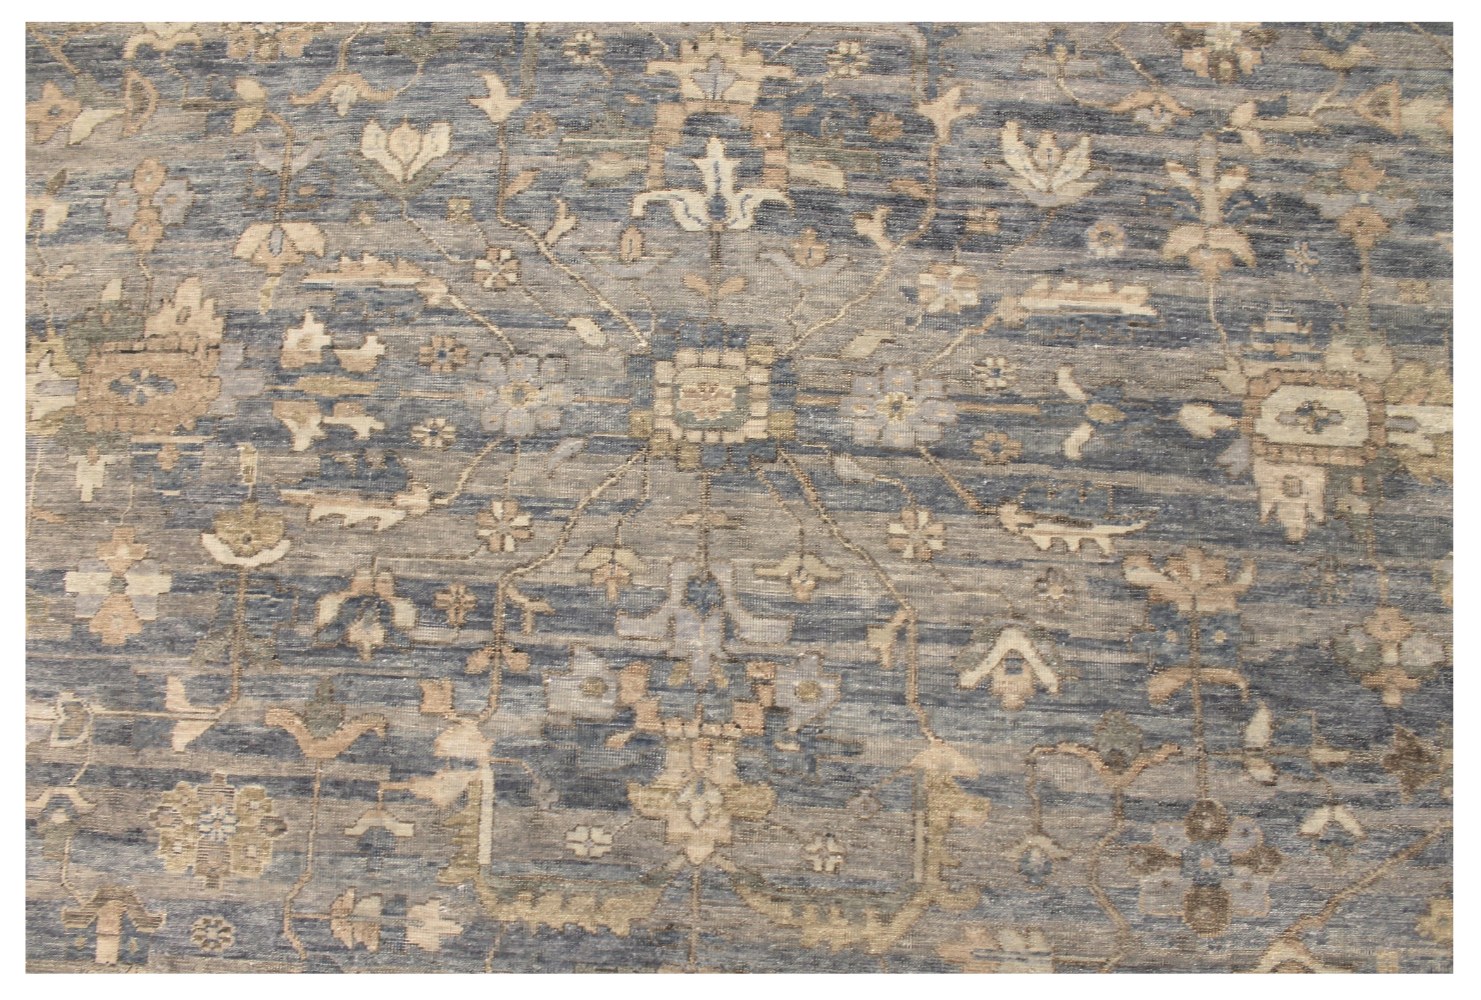 9x12 Aryana & Antique Revivals Hand Knotted Wool Area Rug - MR028543